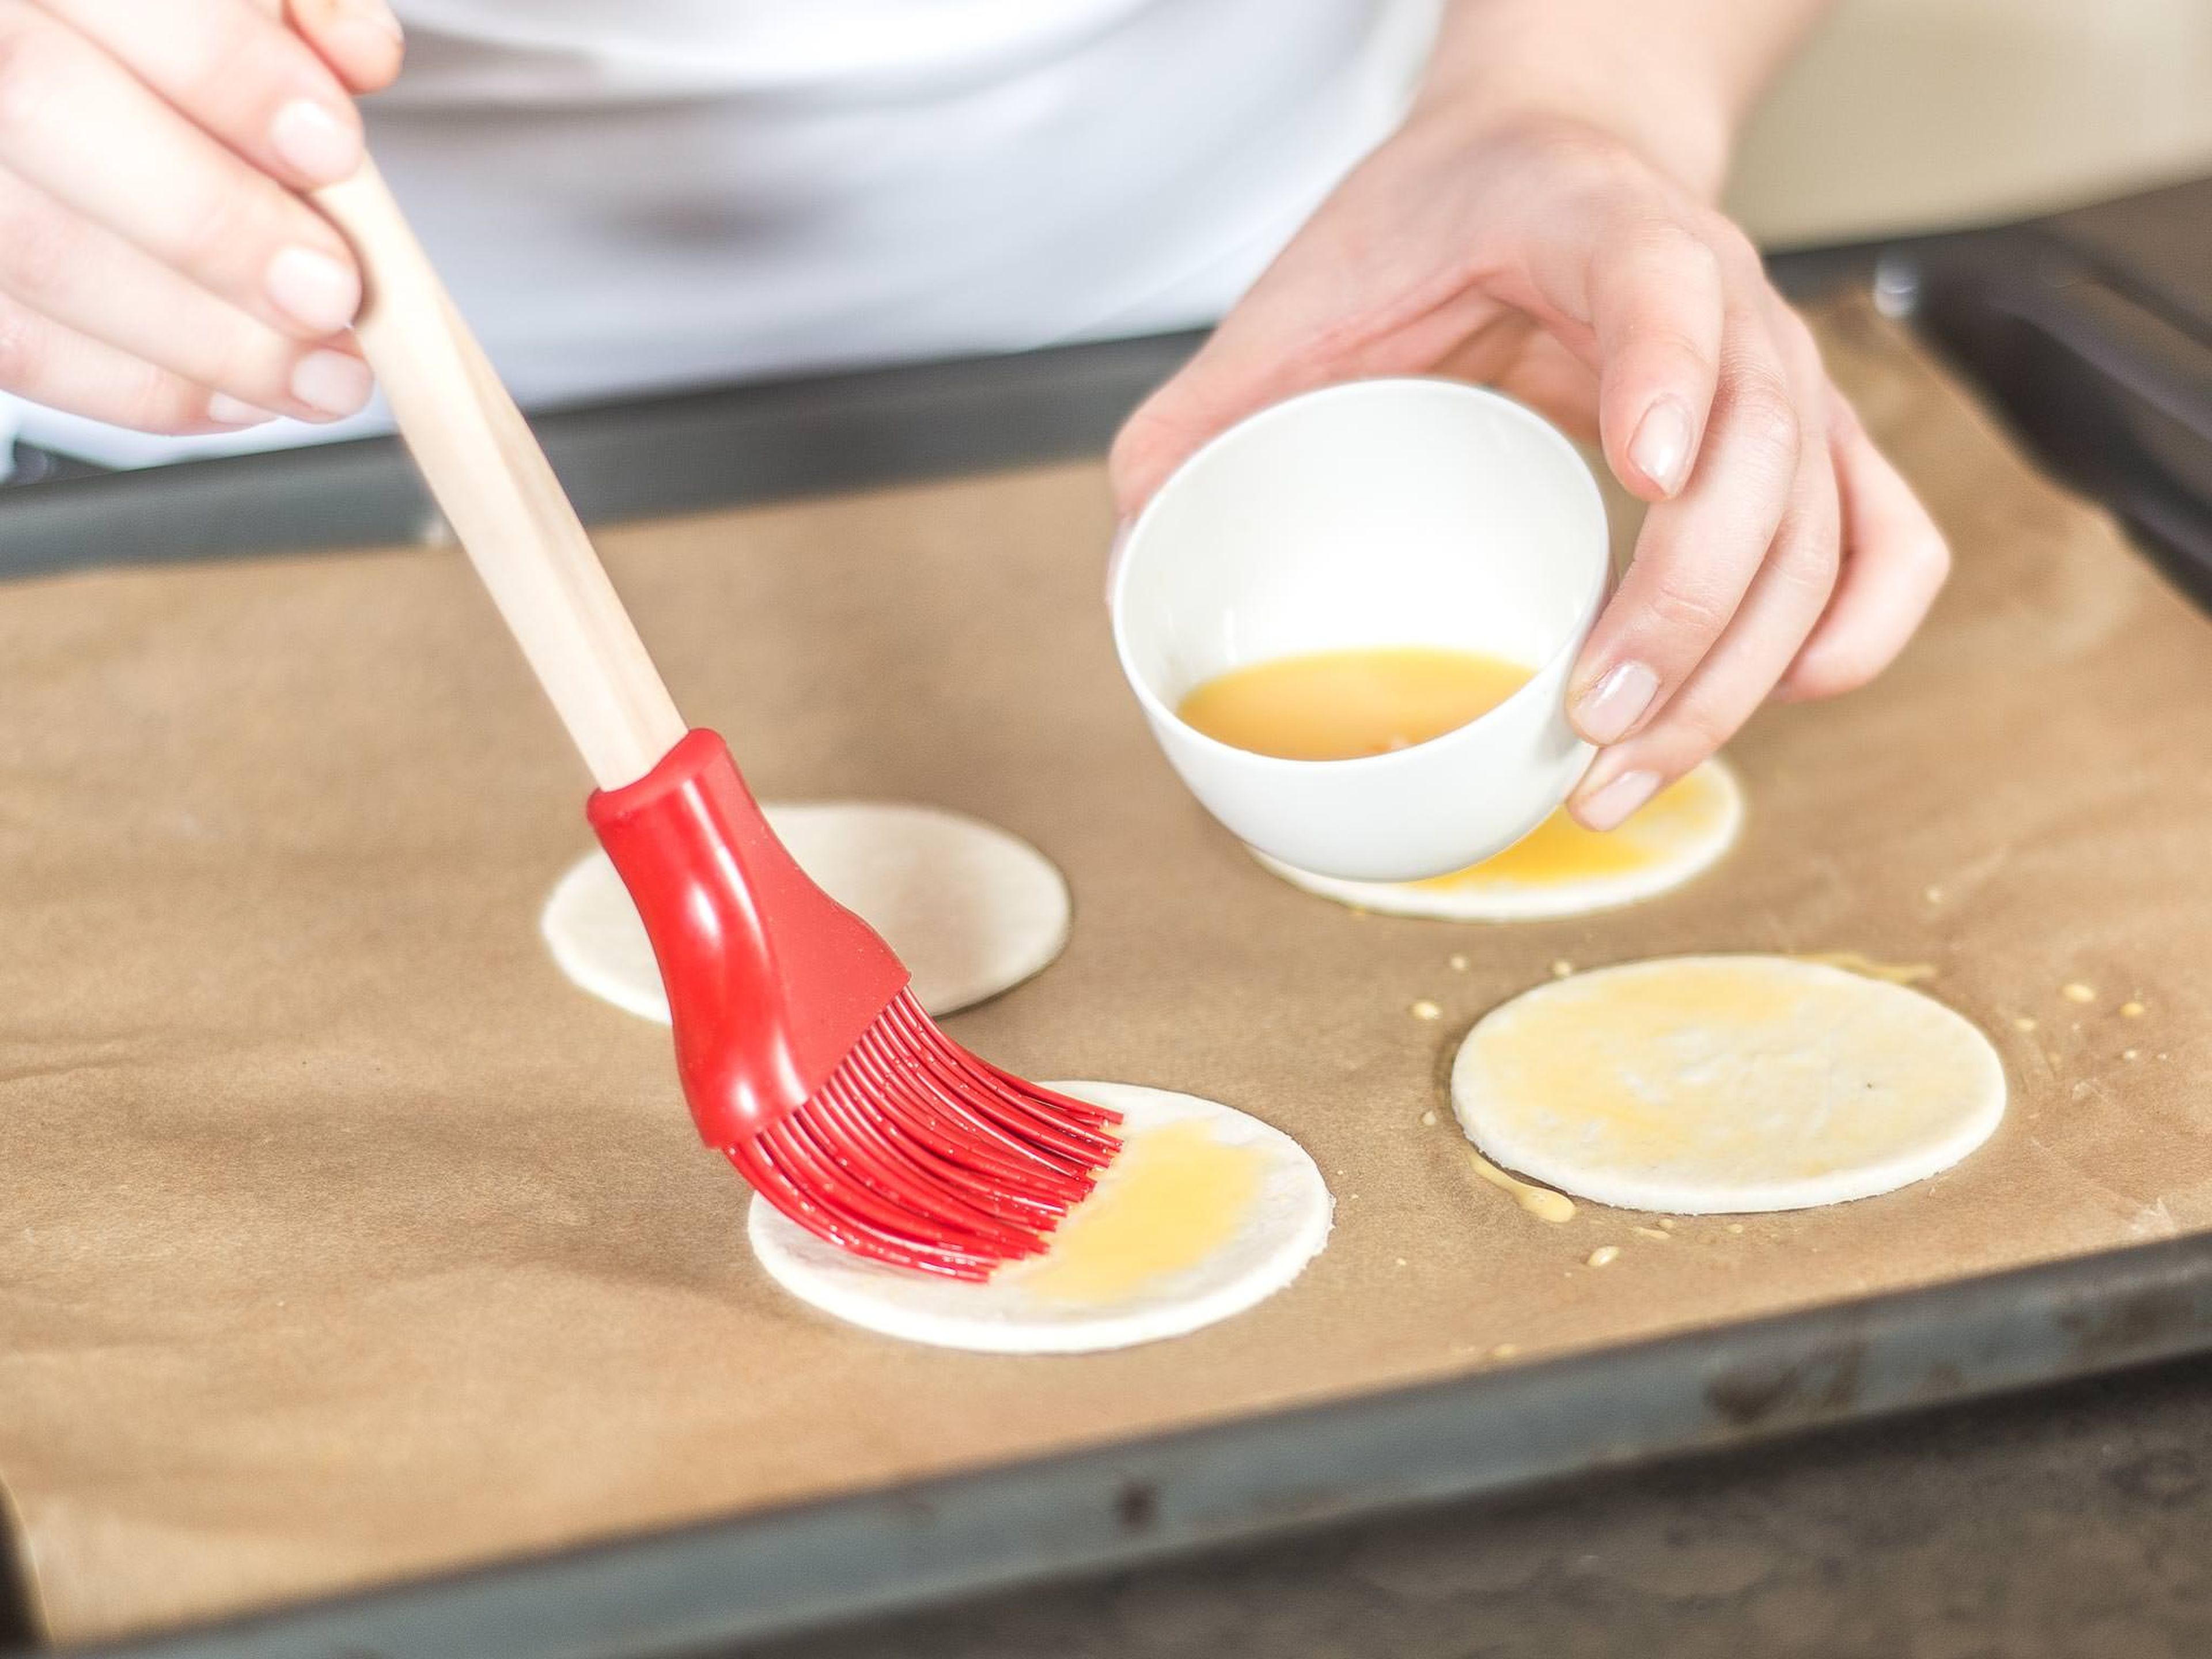 Whisk the egg yolk with water and brush the pastry with it. Bake until golden brown, according to package instructions. In a bowl, mix sugar with orange juice and zest, cinnamon, and honey.